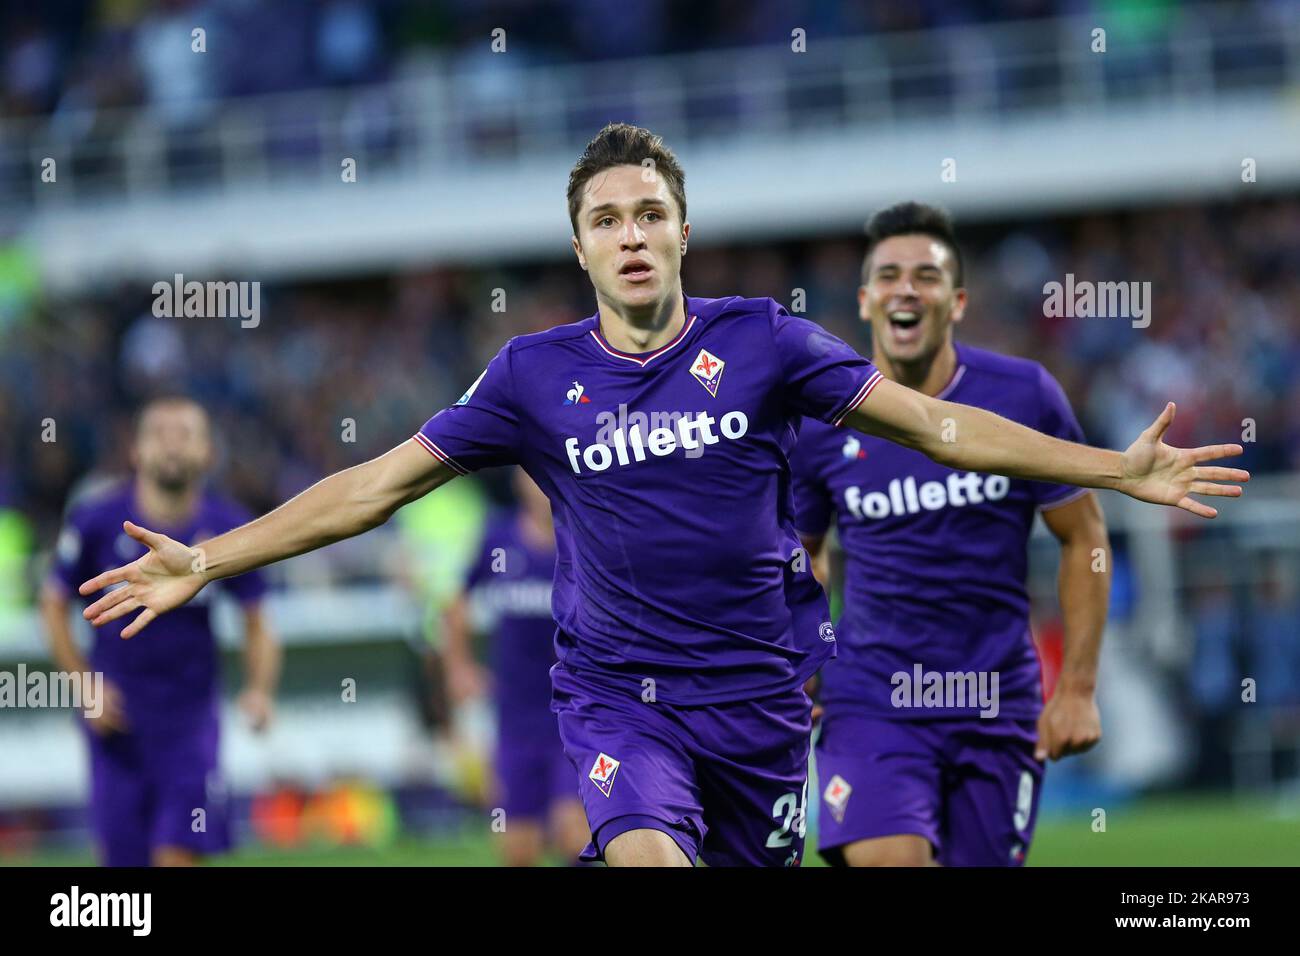 Serie A Fiorentina v Bologna Federico Chiesa of Fiorentina celebration after the goal of 1-0 scored at Artemio Franchi Stadium in Florence, Italy on September 16, 2017. (Photo by Matteo Ciambelli/NurPhoto)  Stock Photo